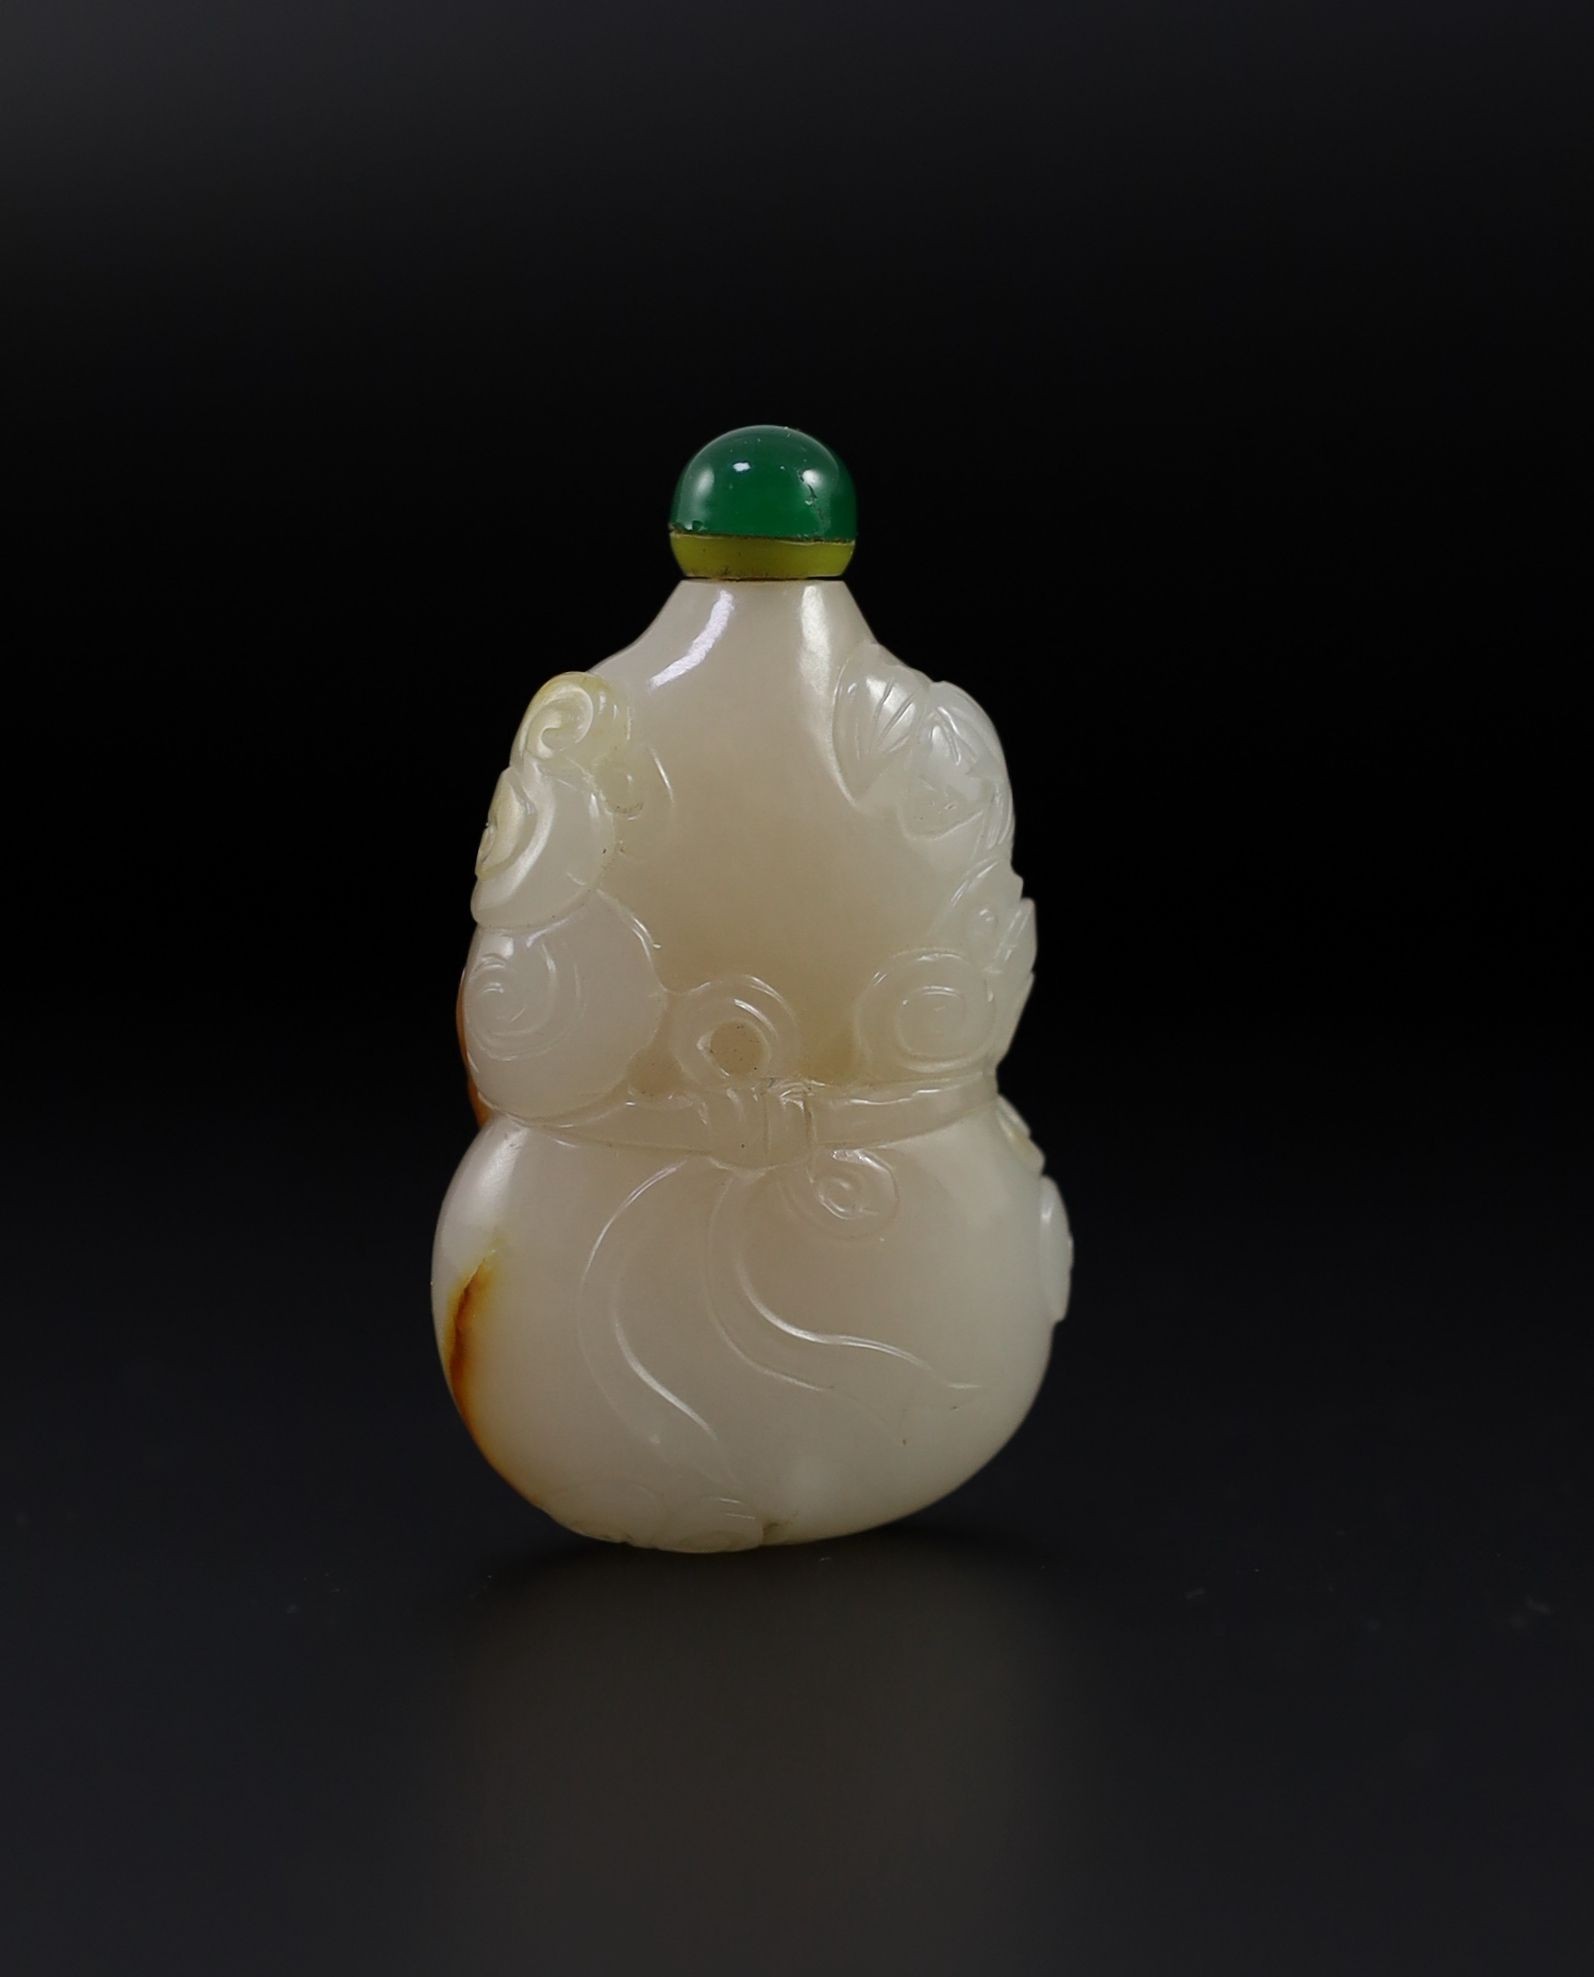 A Chinese white and russet jade snuff bottle, 19th century, 4.9 cm high excluding stopper